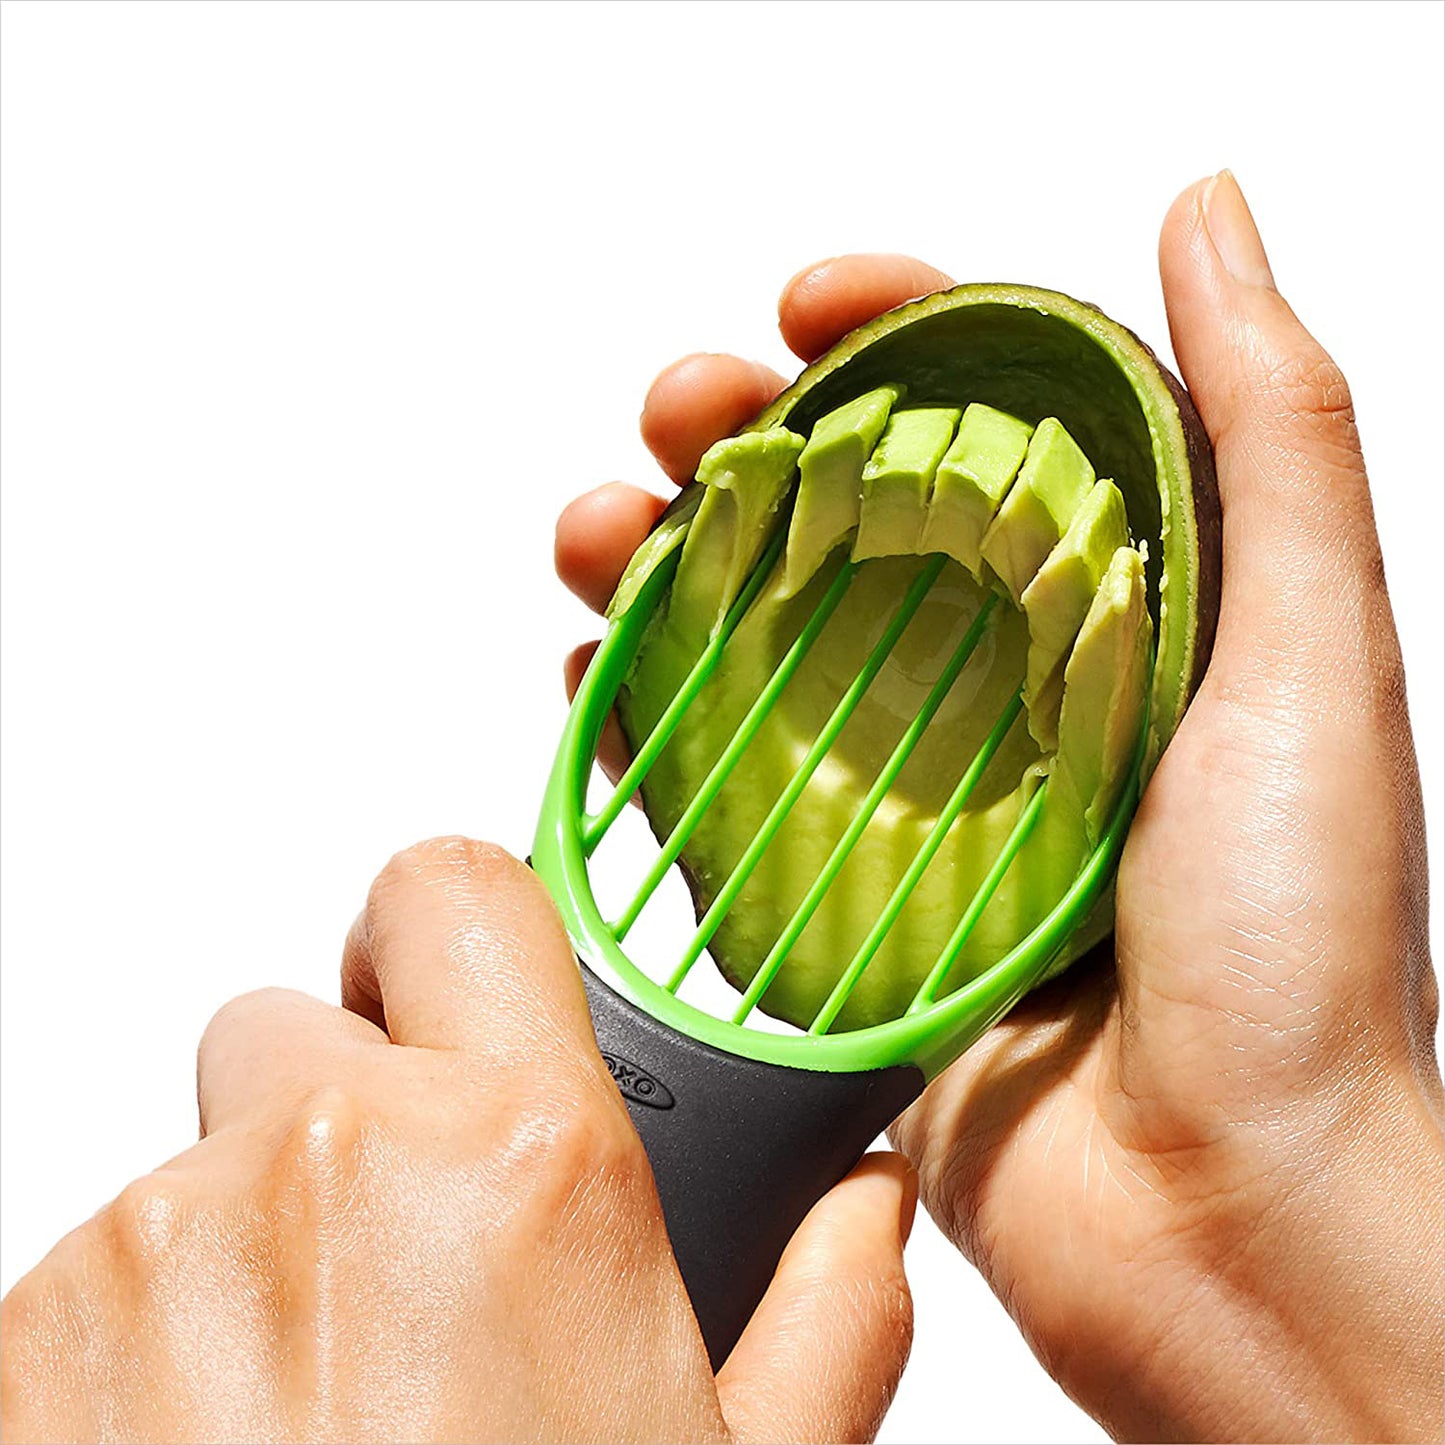 Avocado Lovers Super Kit - Slicer/pitter 3-in-1 tool and silicone cover